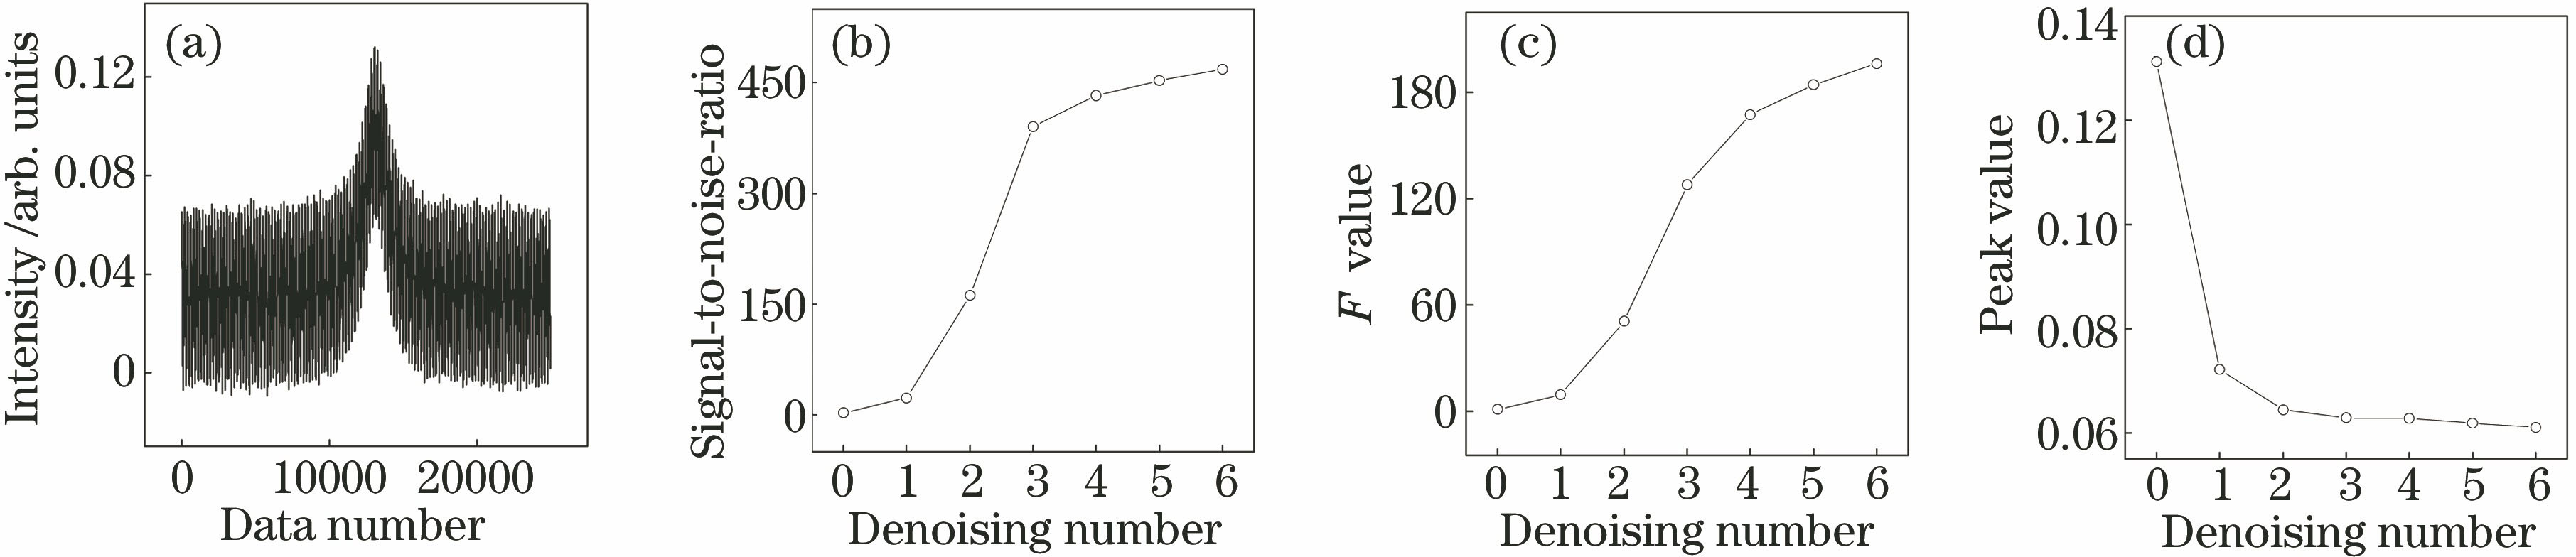 Simulation results. (a) Signal with noises; (b) signal-to-noise ratios at different denoising numbers; (c) interference rejection ratio at different denoising numbers; (d) peak signal amplitude at different denoising numbers